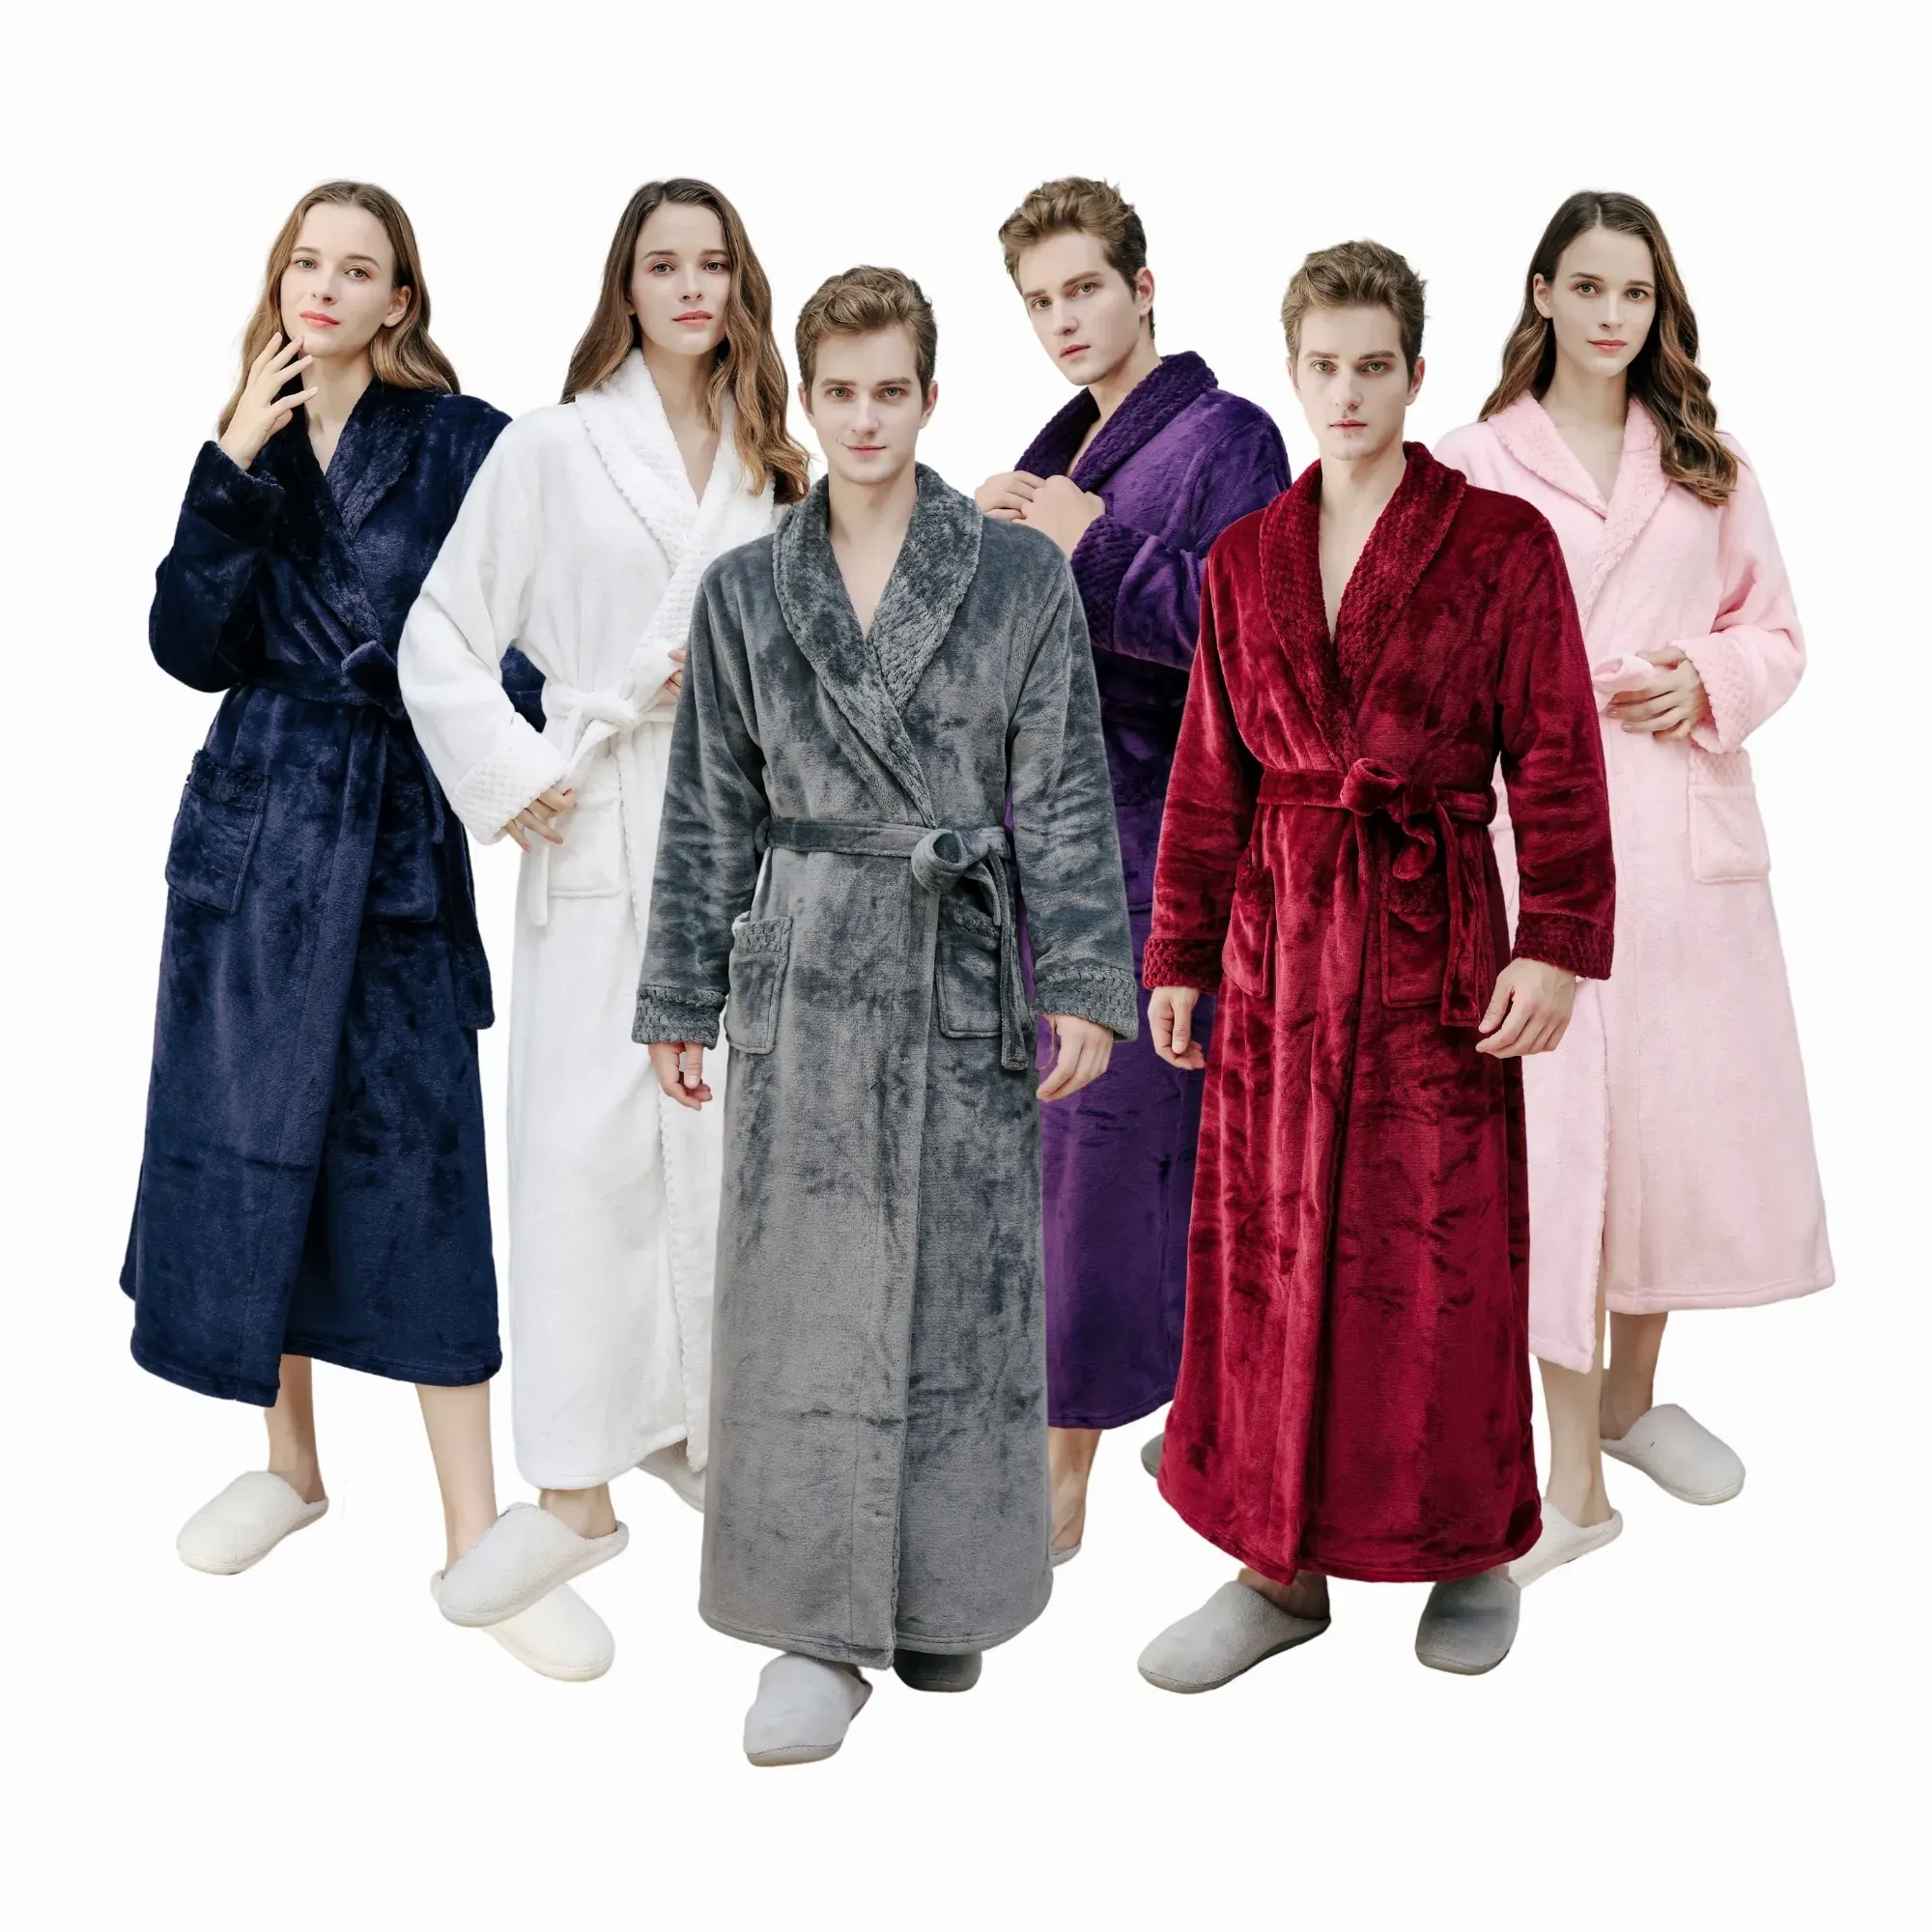 Robes - Webcam Covers Now